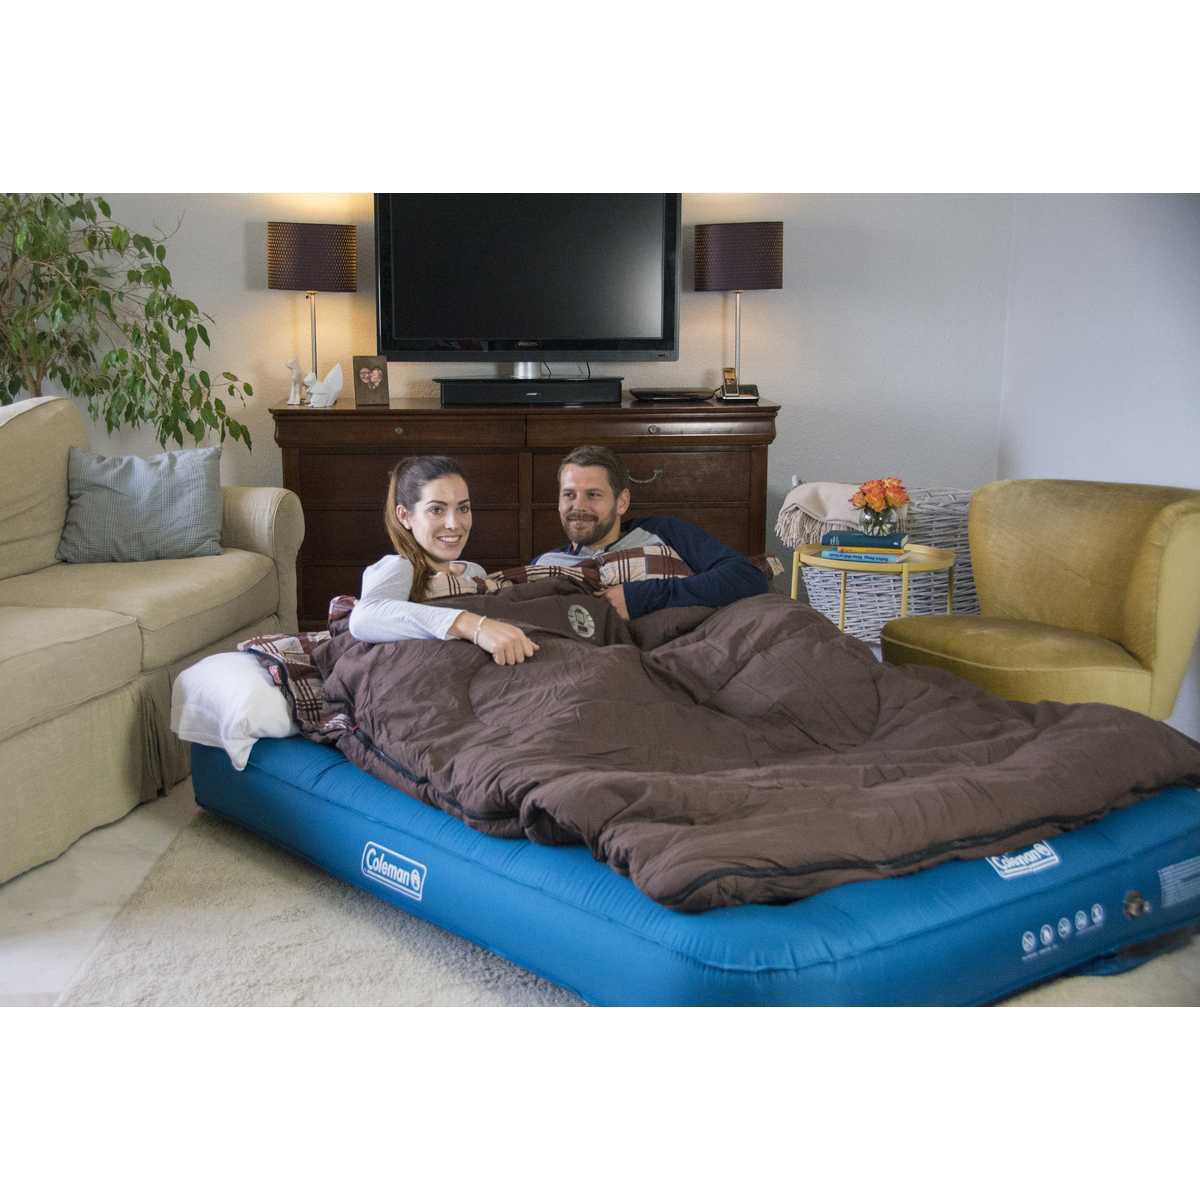 COLEMAN Luftbett Extra Durable Airbed Double - 2000031638